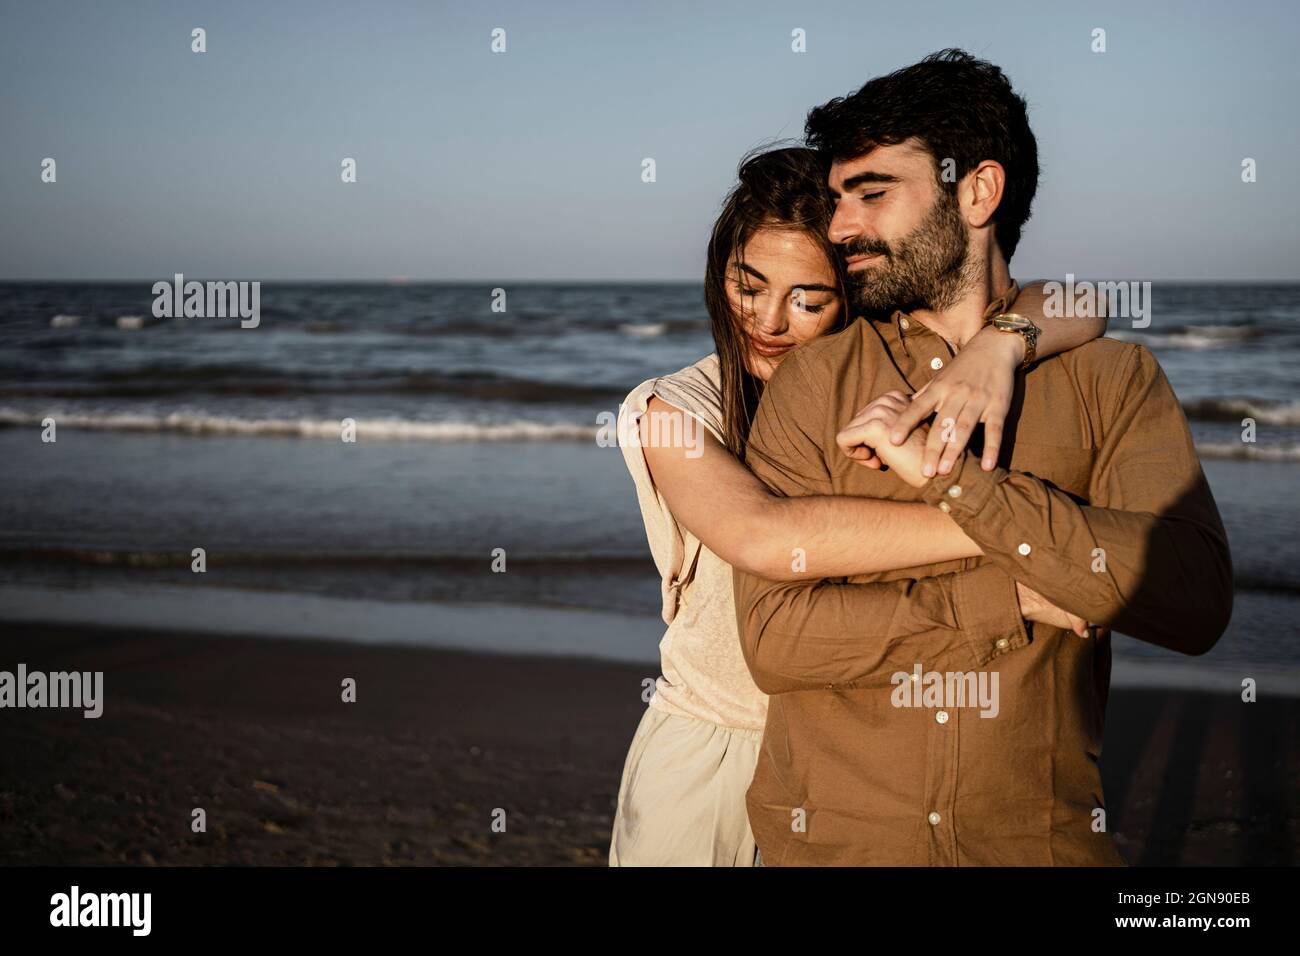 Smiling girlfriend embracing boyfriend from behind at beach Stock Photo